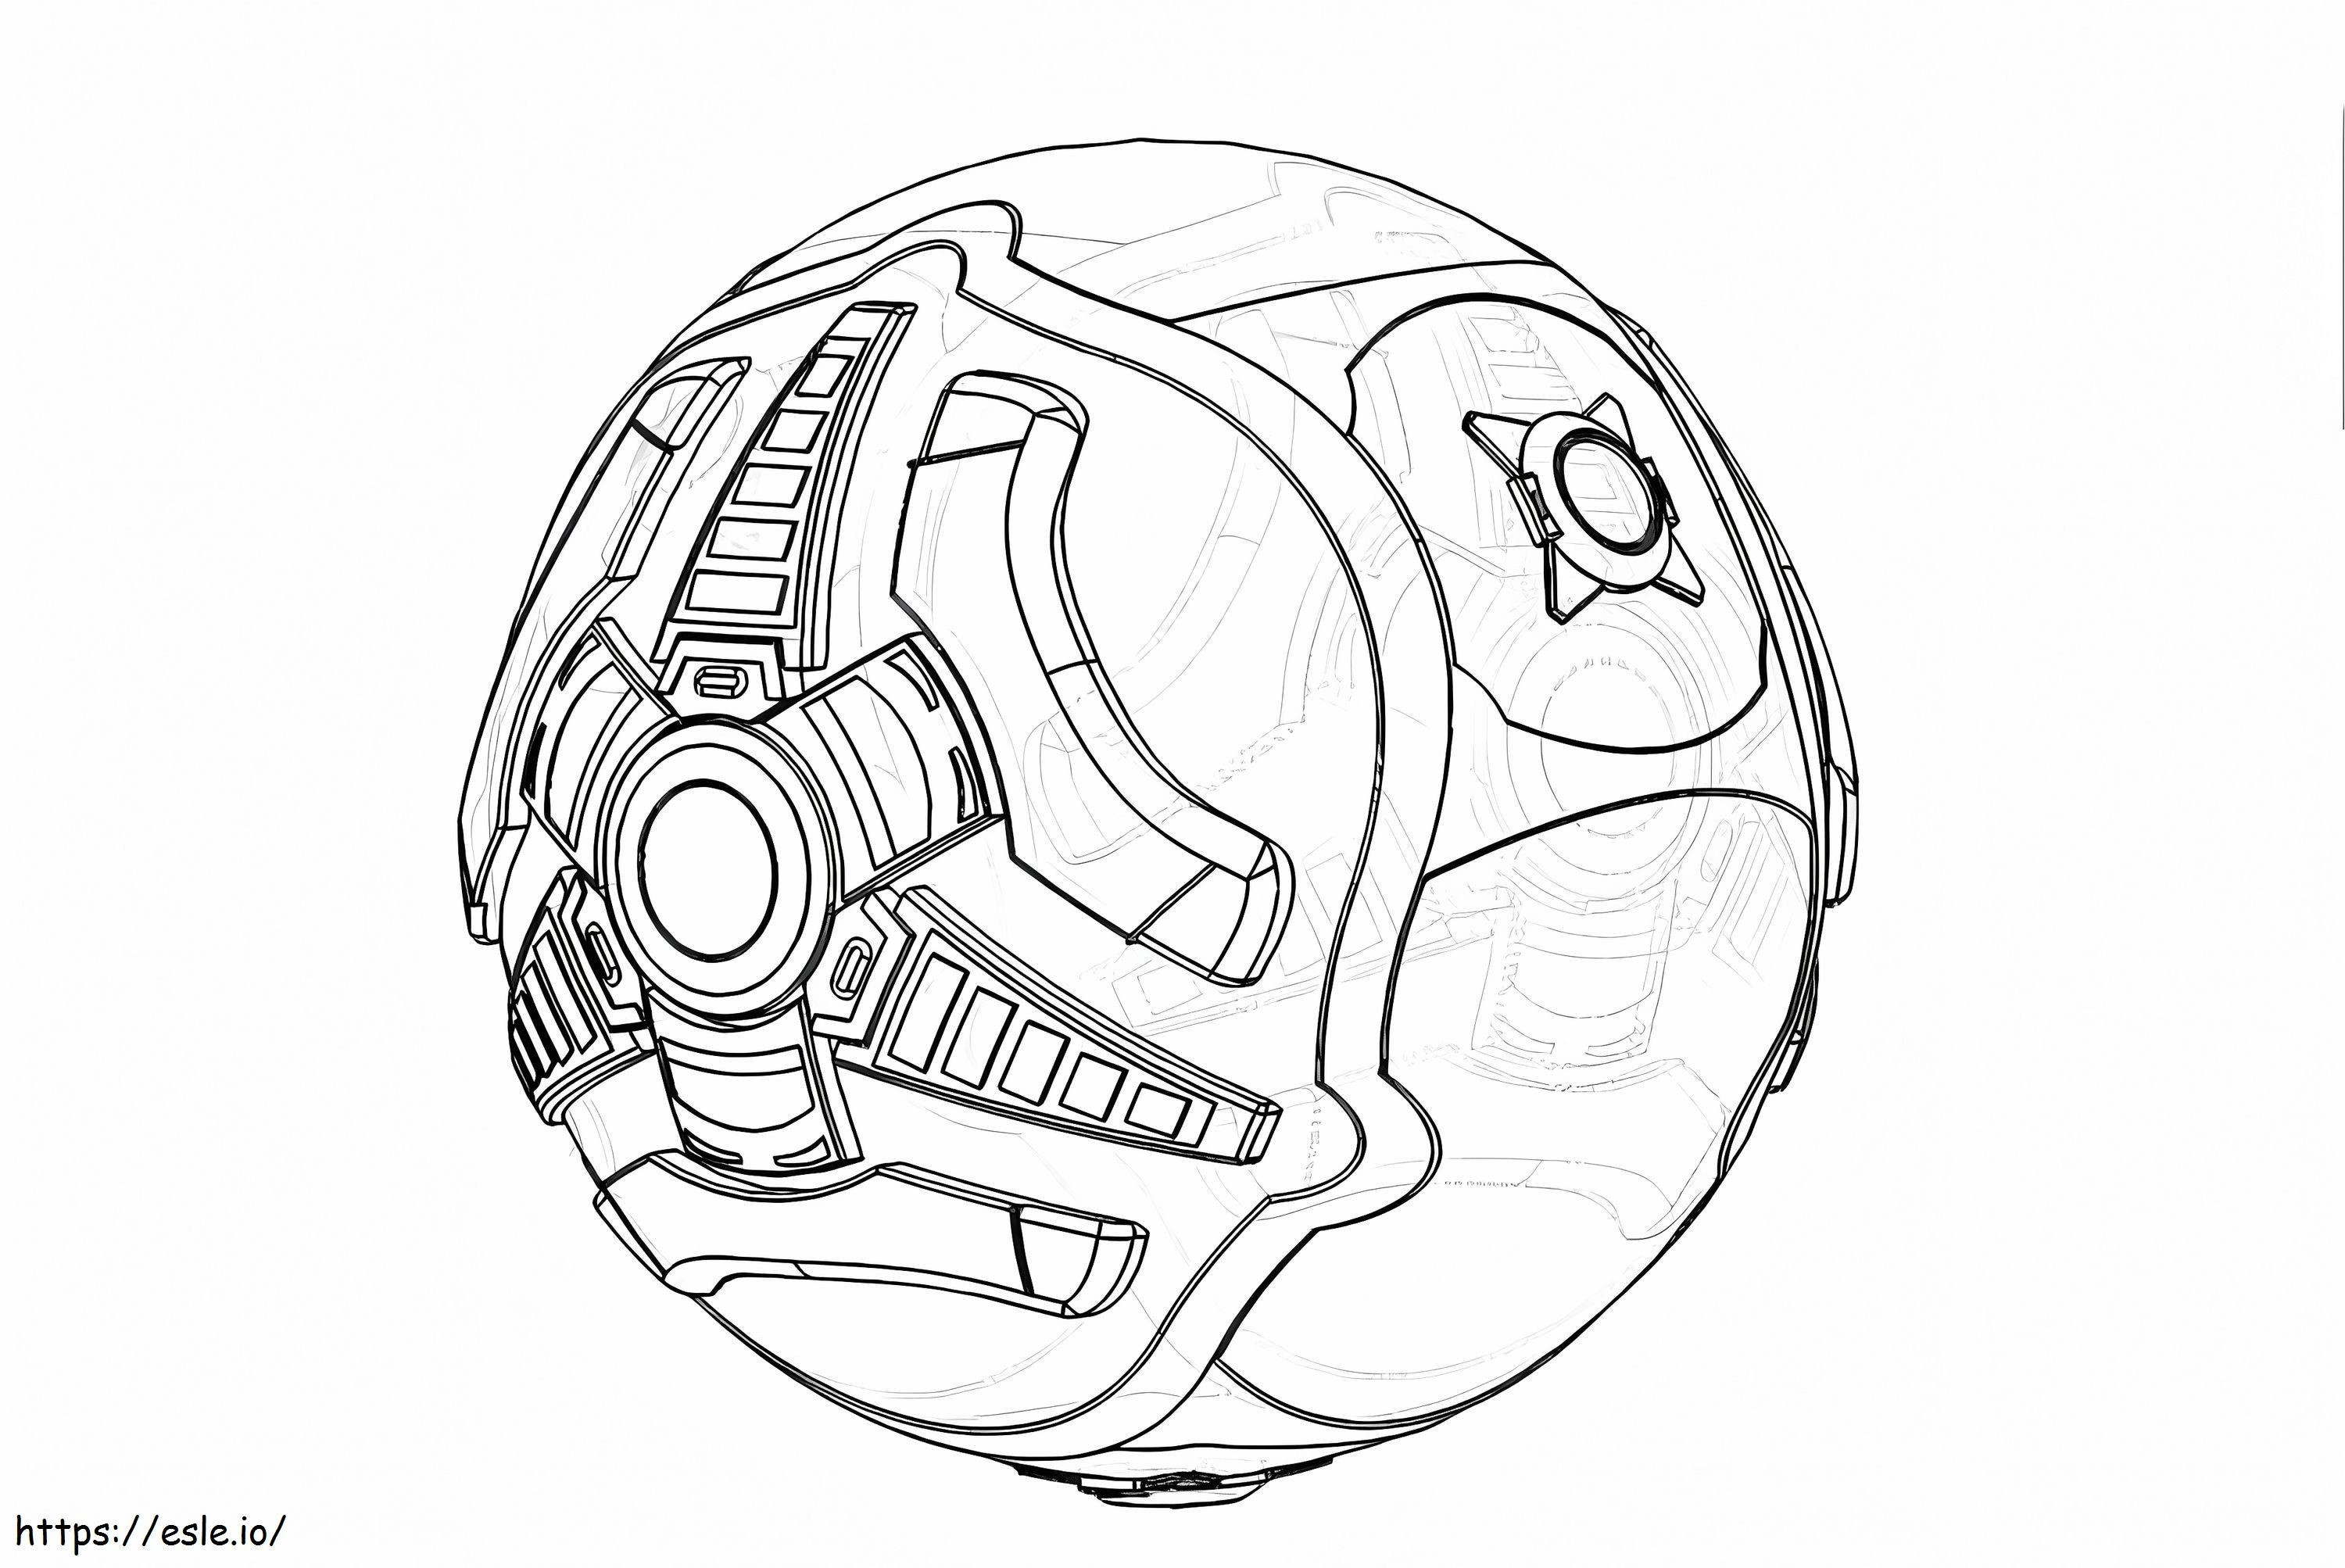 Ball Rocket League coloring page